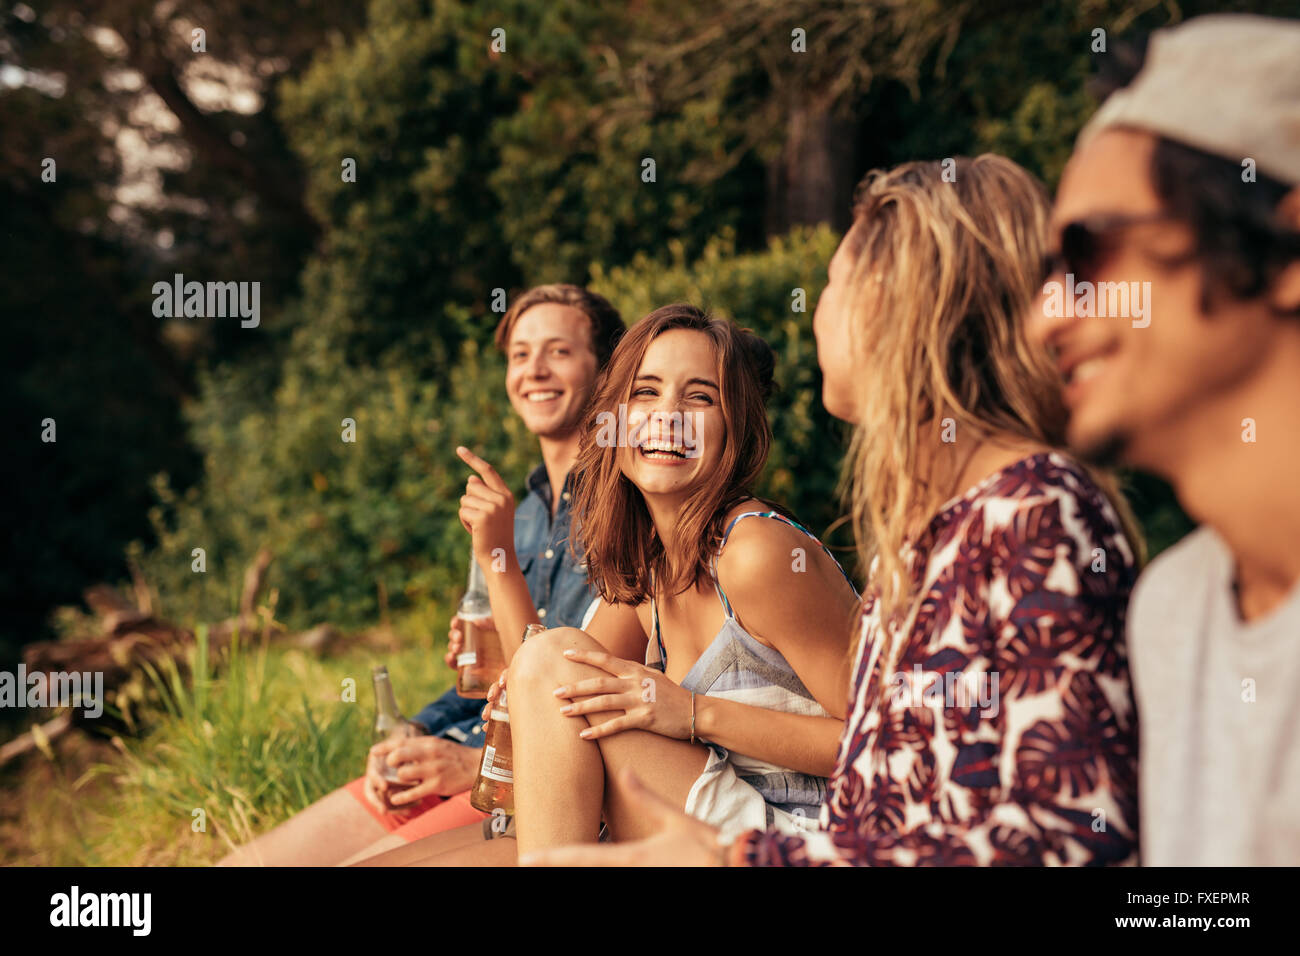 Portrait of cheerful young friends hanging out with beers. Group of friends sitting outdoors and having fun. Stock Photo